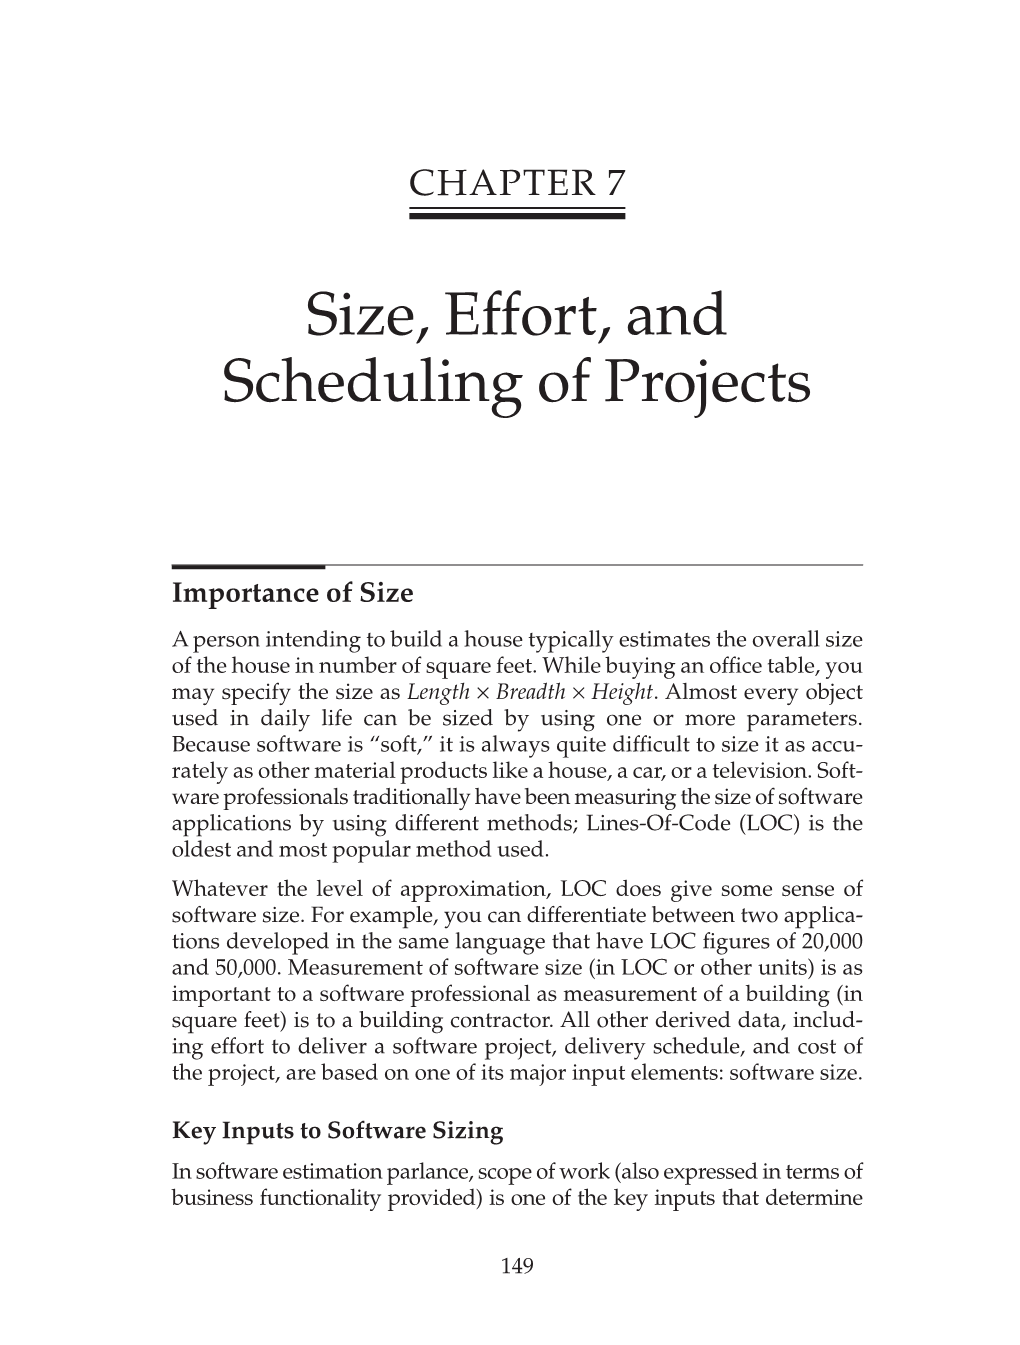 Size, Effort, and Scheduling of Projects